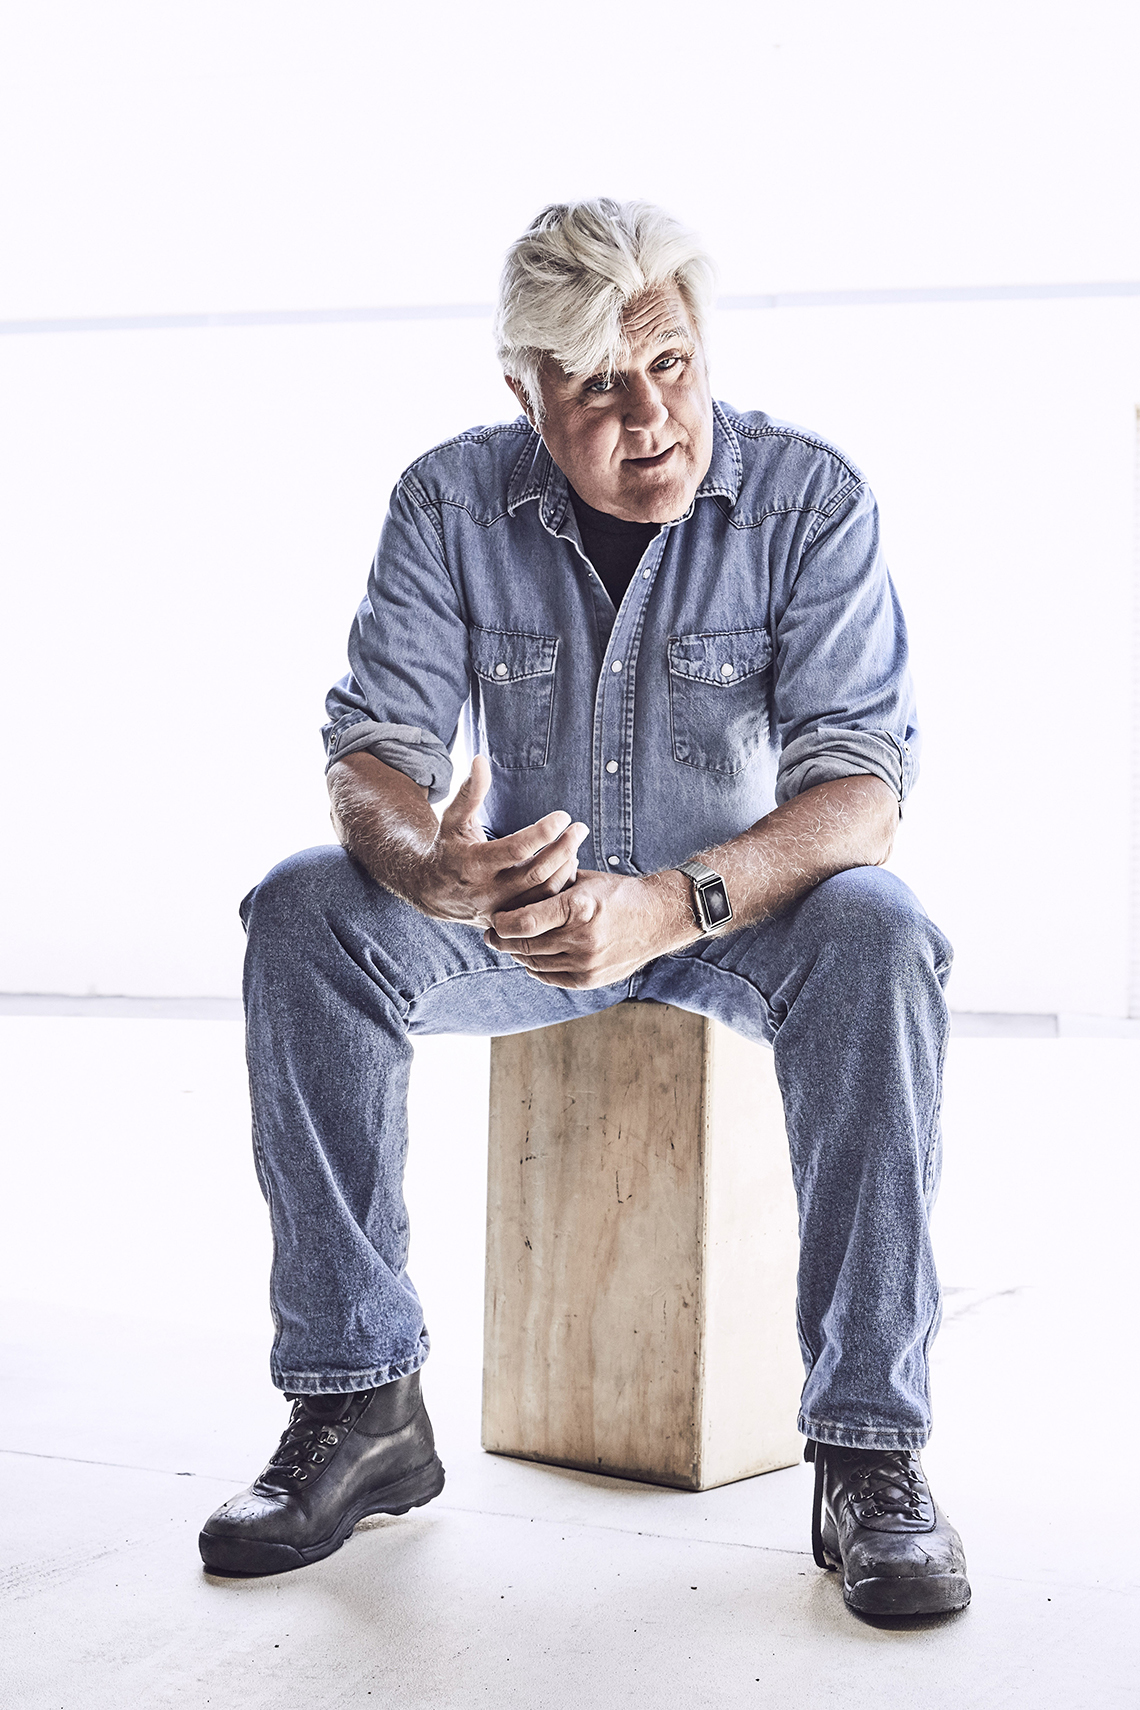 Comedian and former talk show host Jay Leno